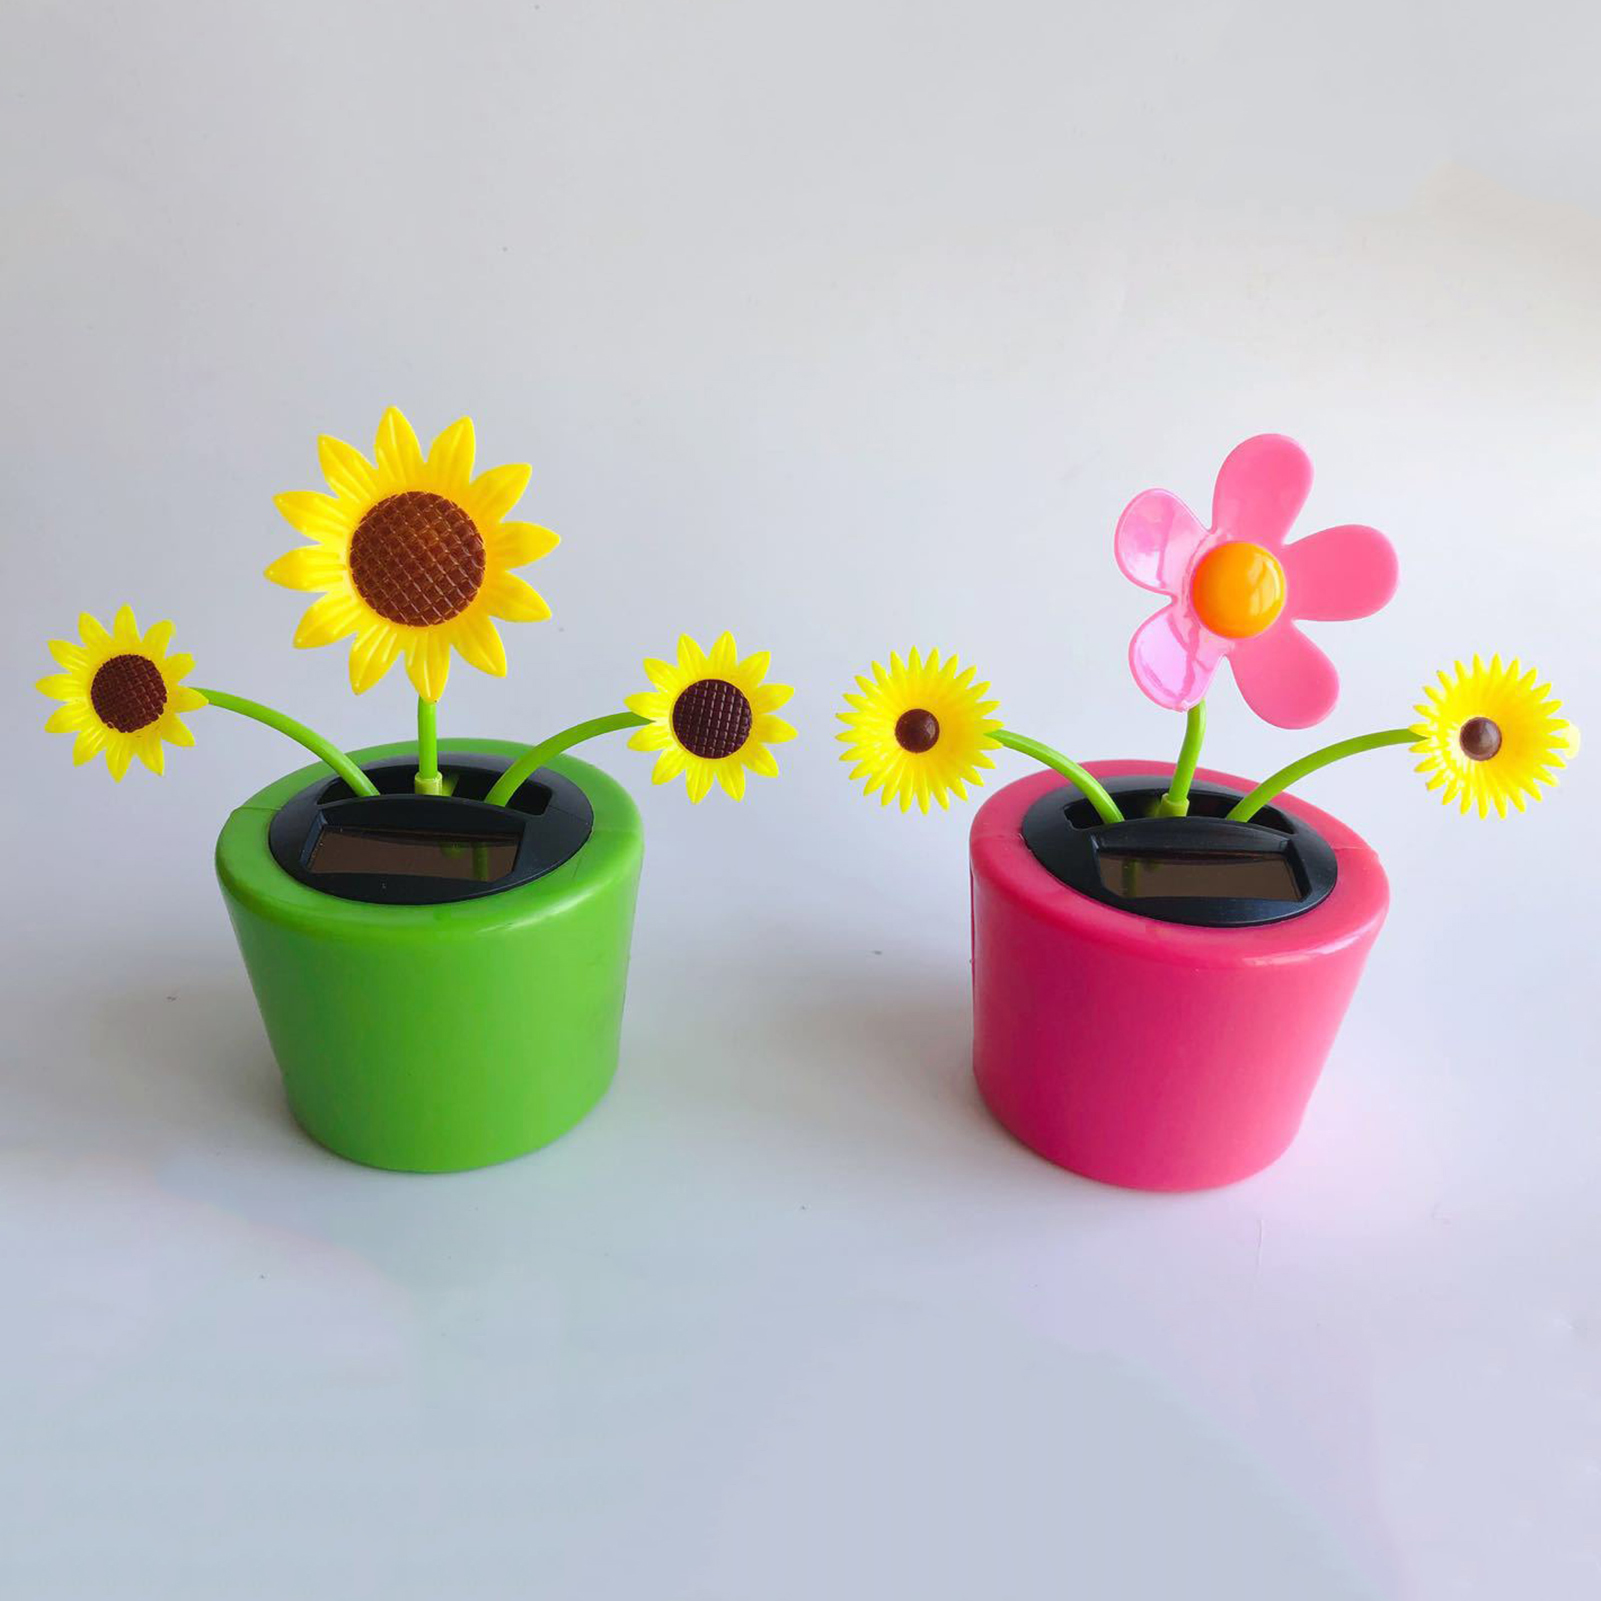 Cute Solar Power Flip Flap Flower Insect for Car Decoration Swing Dancing Flower Eco-Friendly Bobblehead Solar Dancing Flowers in Colorful Pots - image 4 of 8